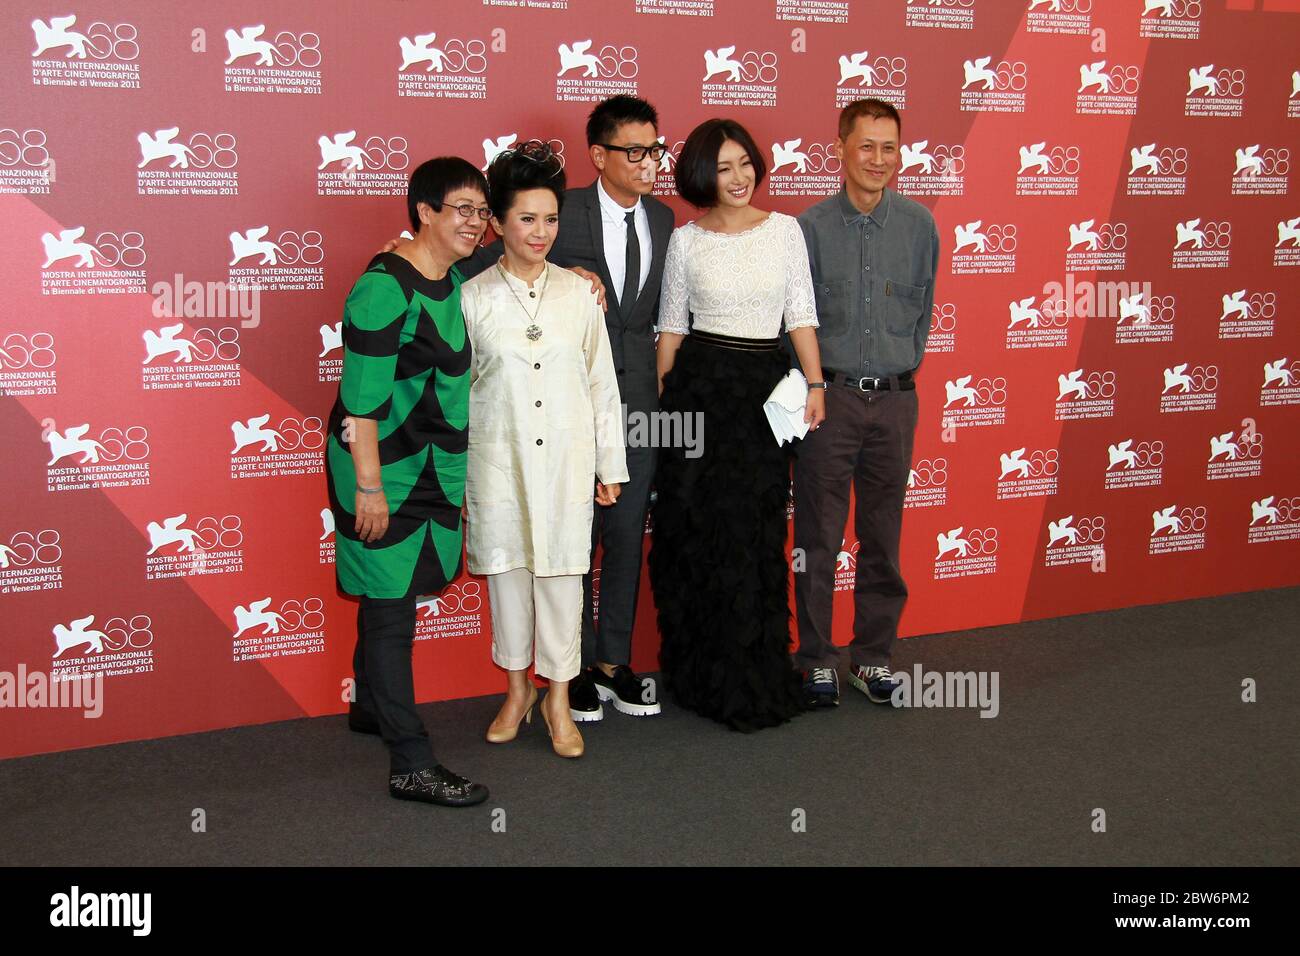 VENICE, ITALY - SEPTEMBER 05: Ann Hui, Deanie Ip, Qin Hailu, Andy Lau and Roger Lee attends the 'Tao Jie' Photocall Stock Photo